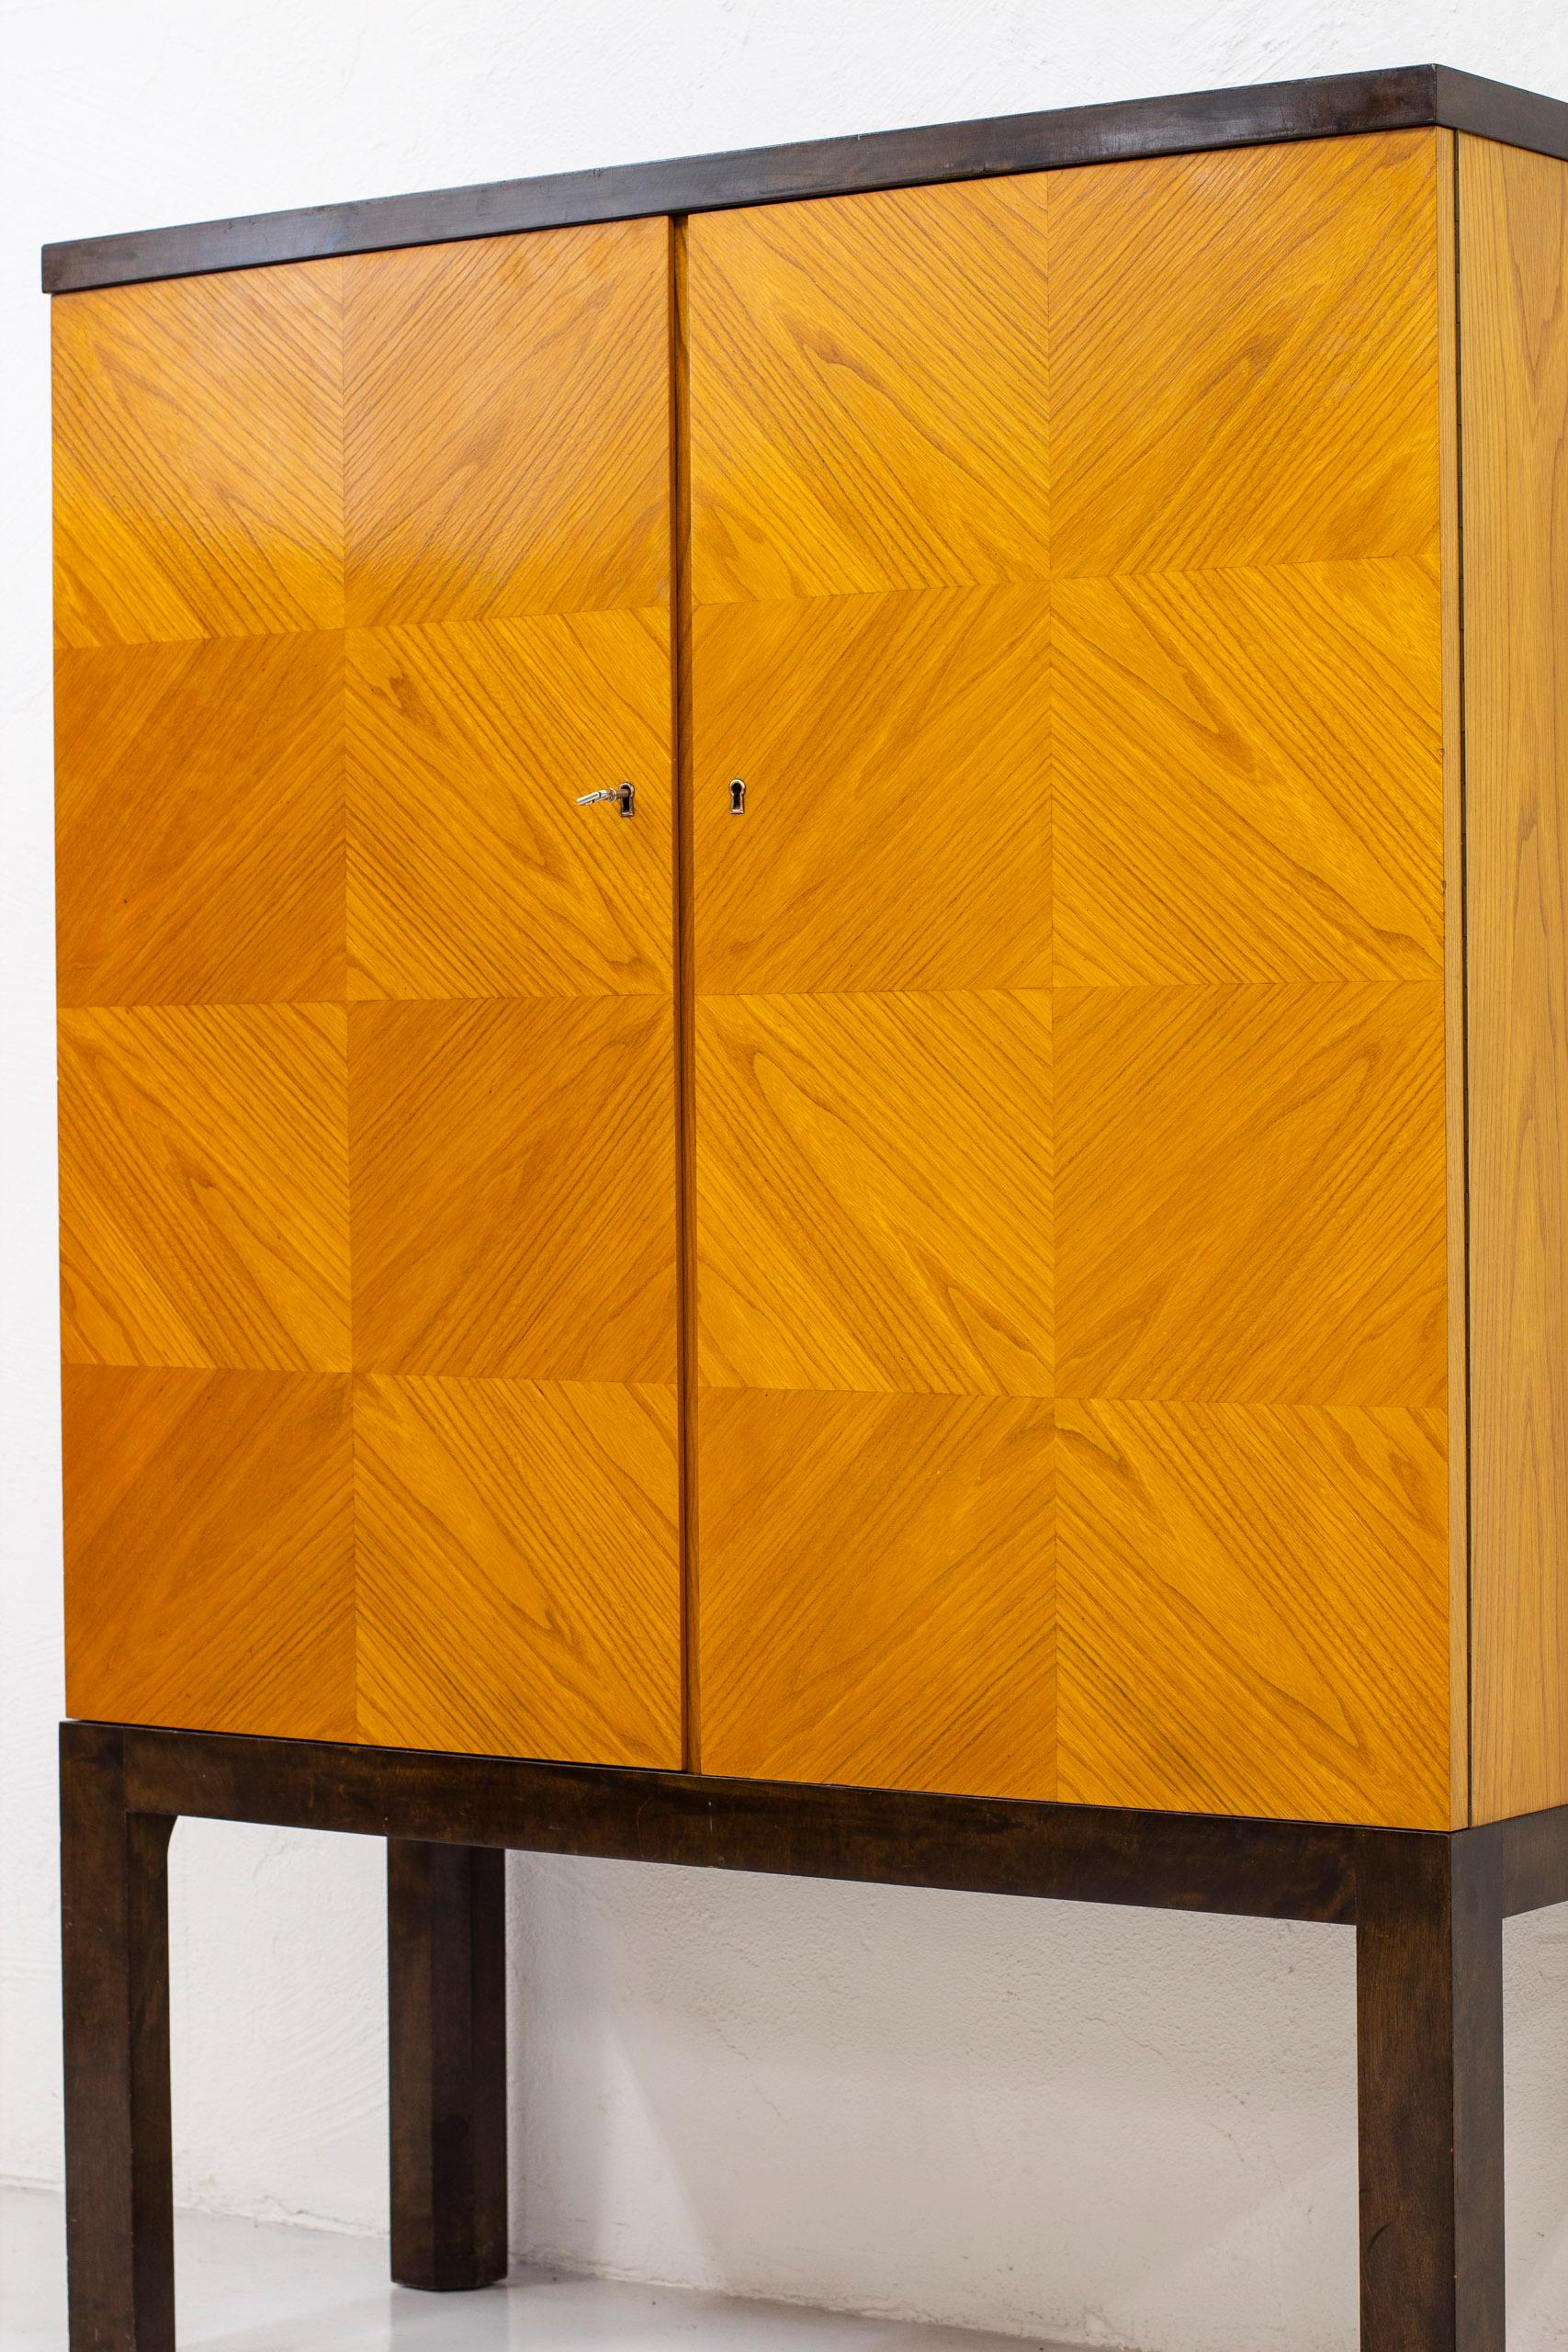 Modernist/Art Deco cabinet in the style of Otto Schulz. Produced in Sweden by unknown cabinetmaker during the 1930s. Stained birch legs and top with doors veneered in a checker board pattern in elm wood. Inside of the cabinet veneered in oak with